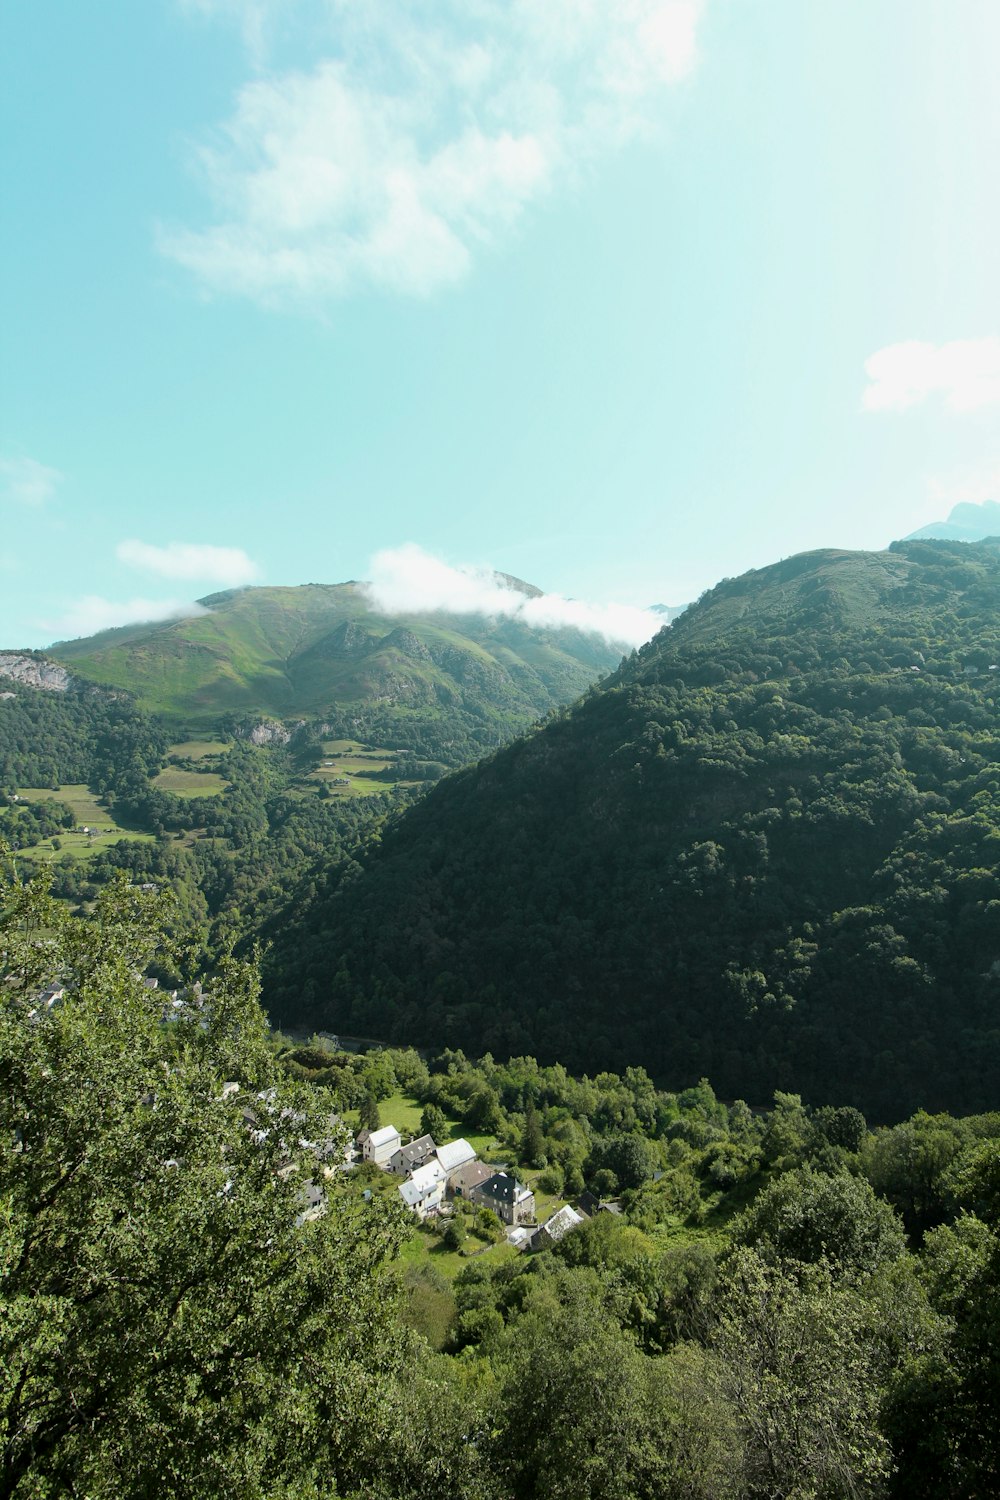 a view of a lush green valley surrounded by mountains